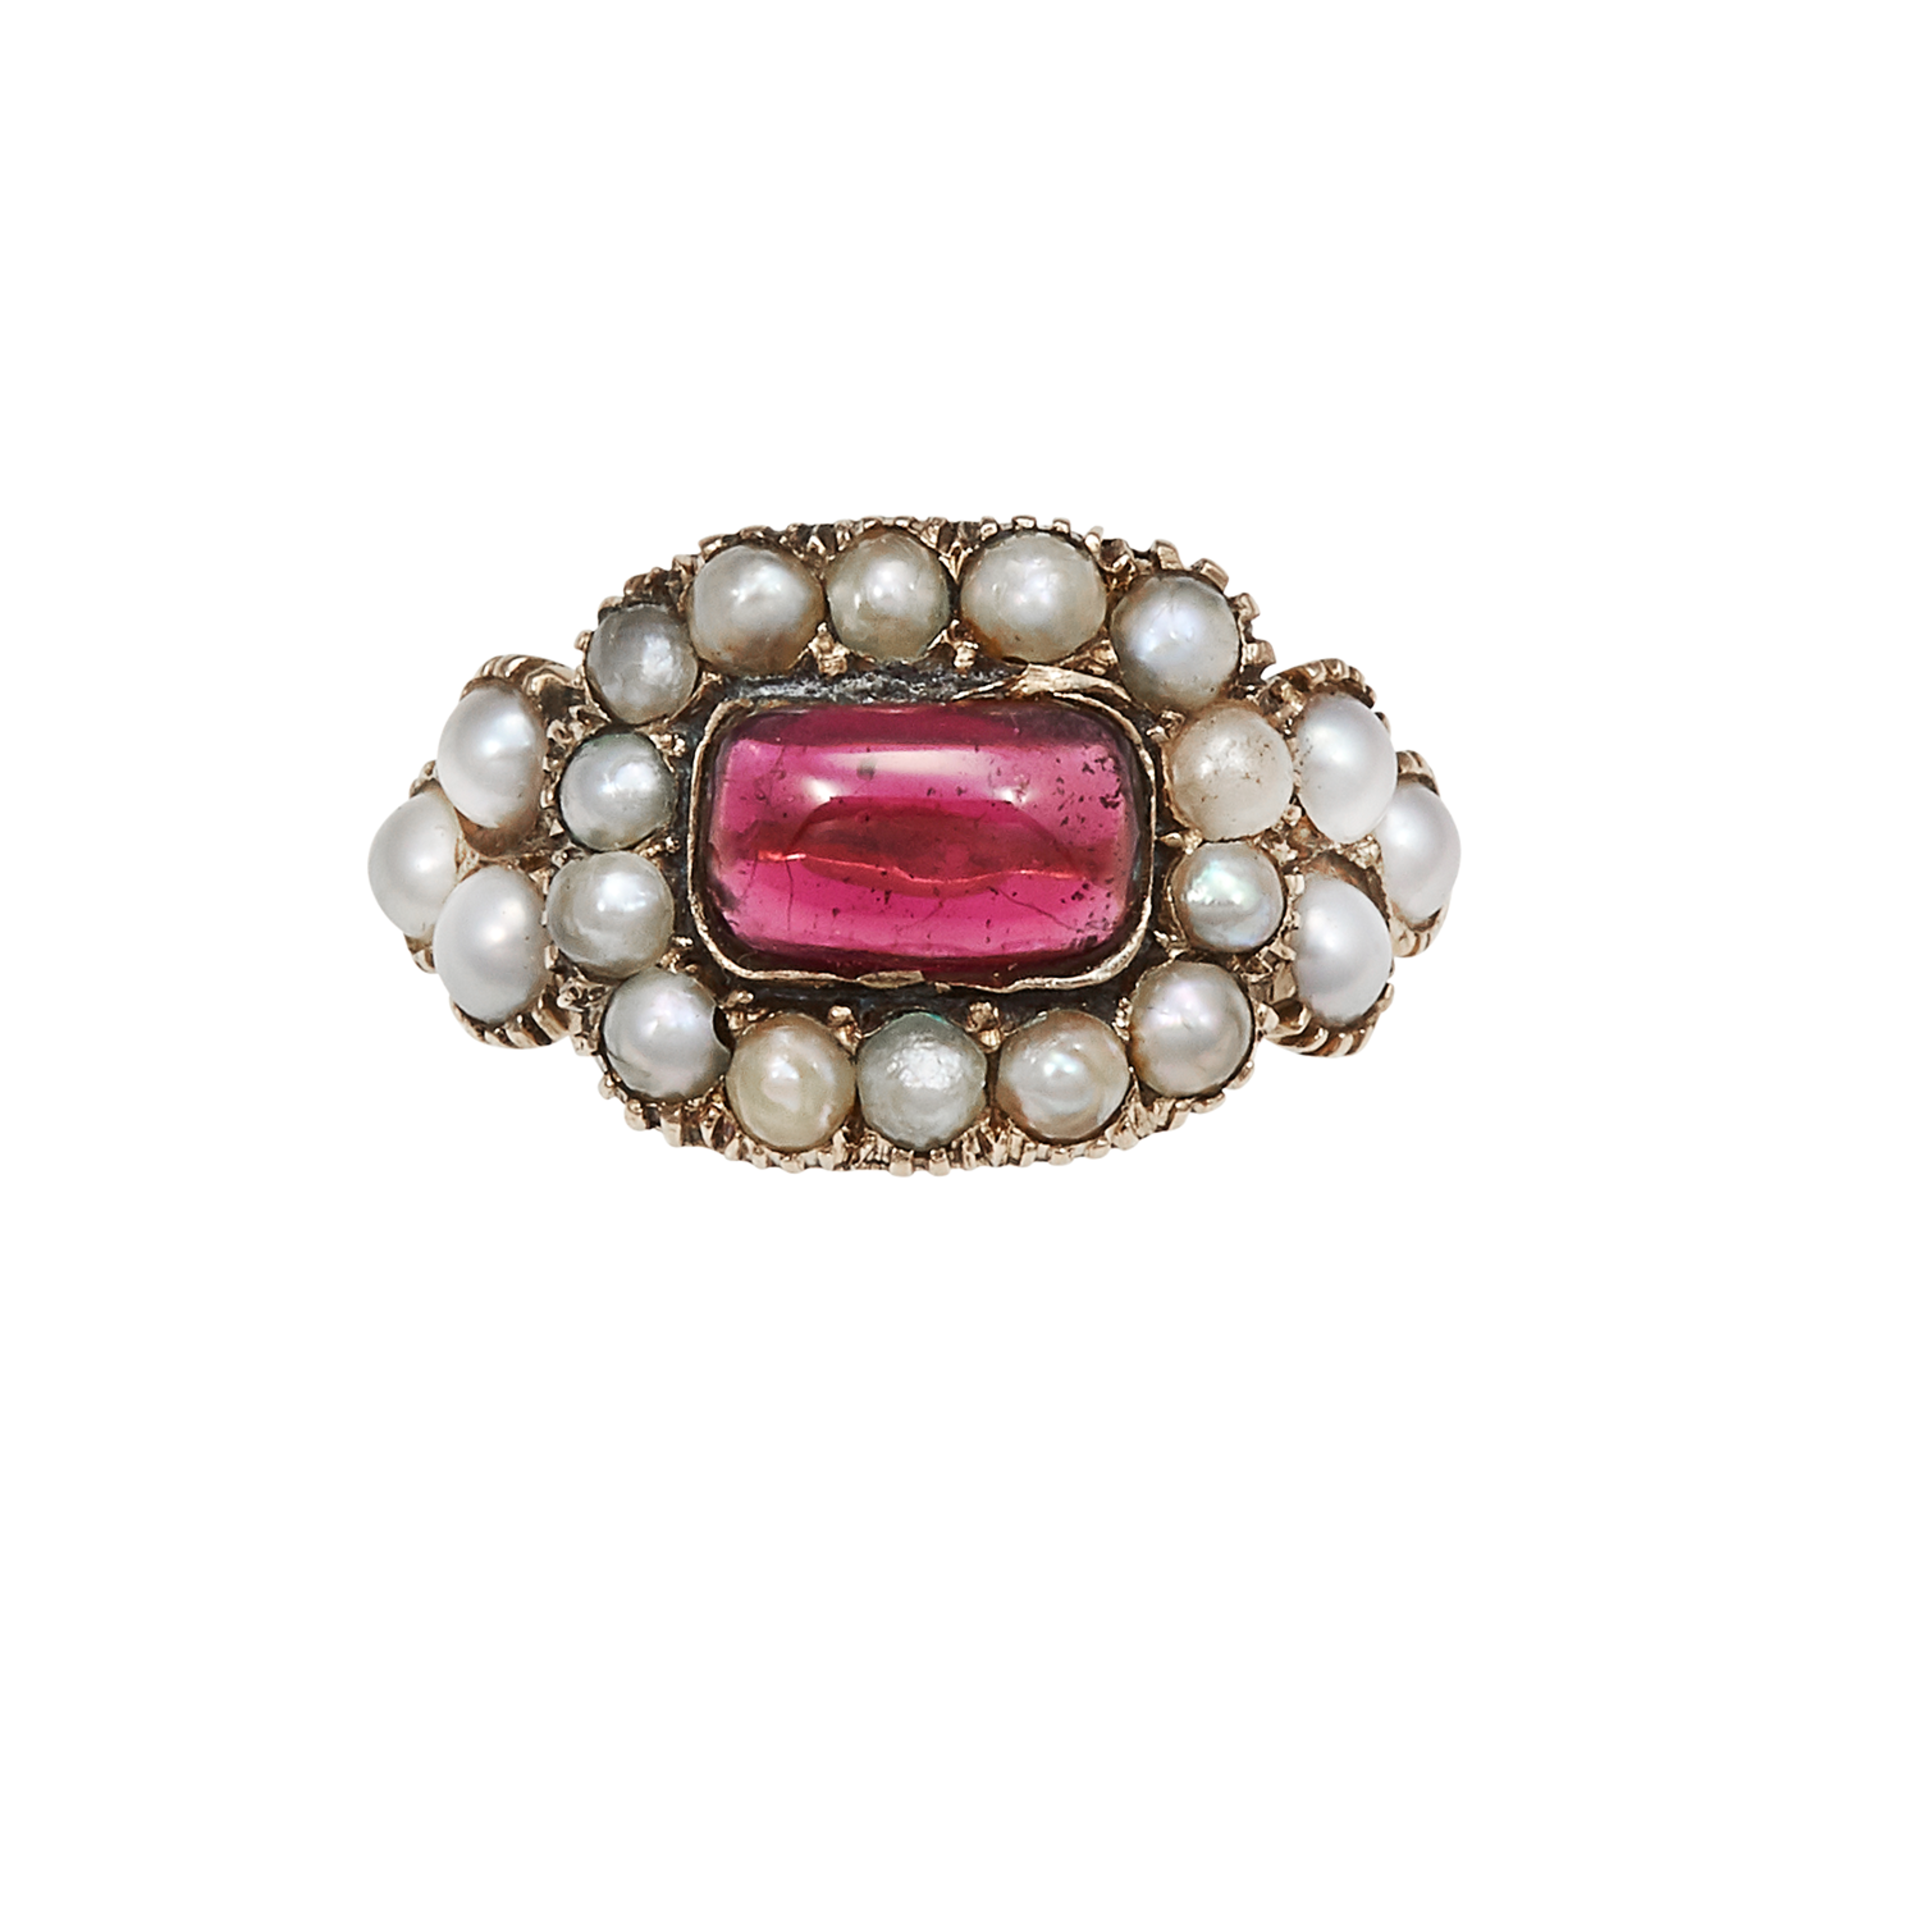 AN ANTIQUE GARNET AND SEED PEARL RING, EARLY 19TH CENTURY in high carat yellow gold, the rounded